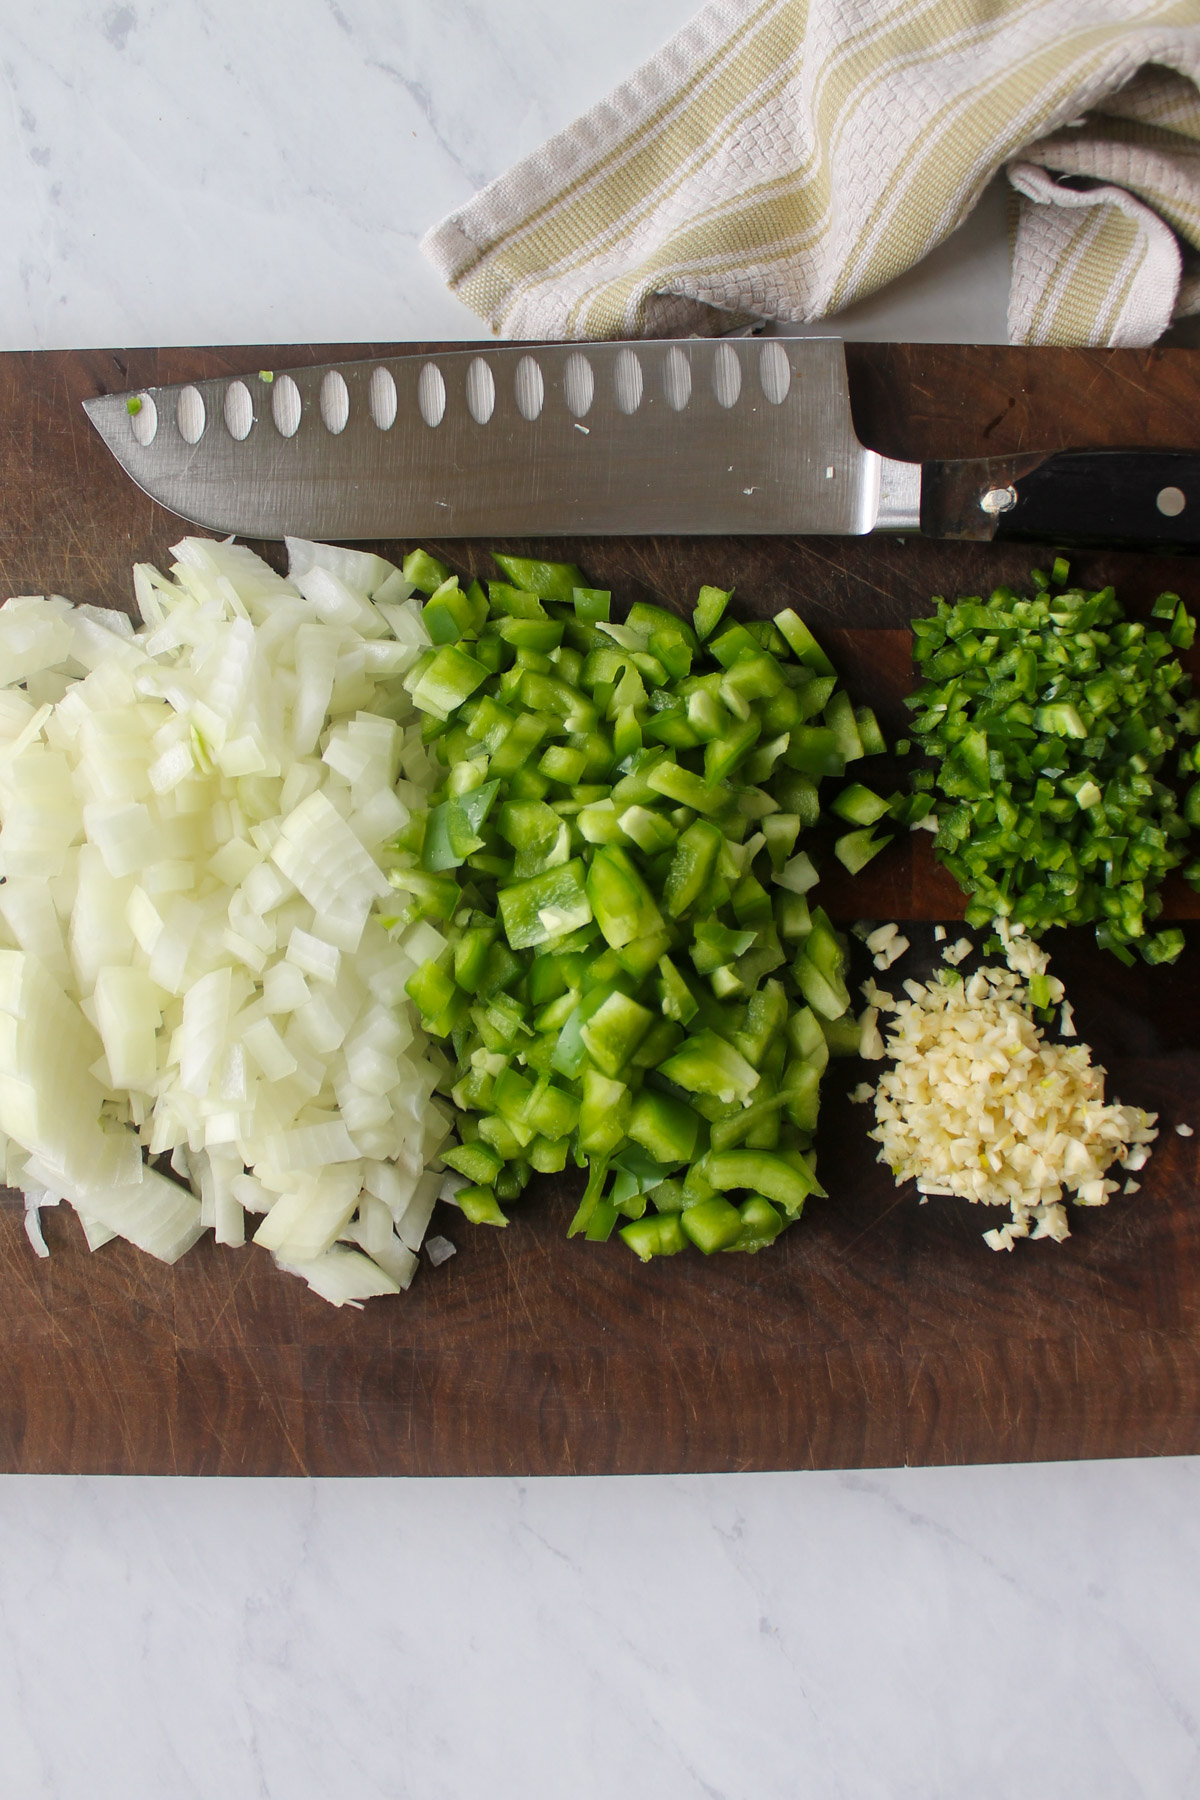 Chopped onion, green bell pepper, jalapeno pepper, and garlic on a wooden cutting board.